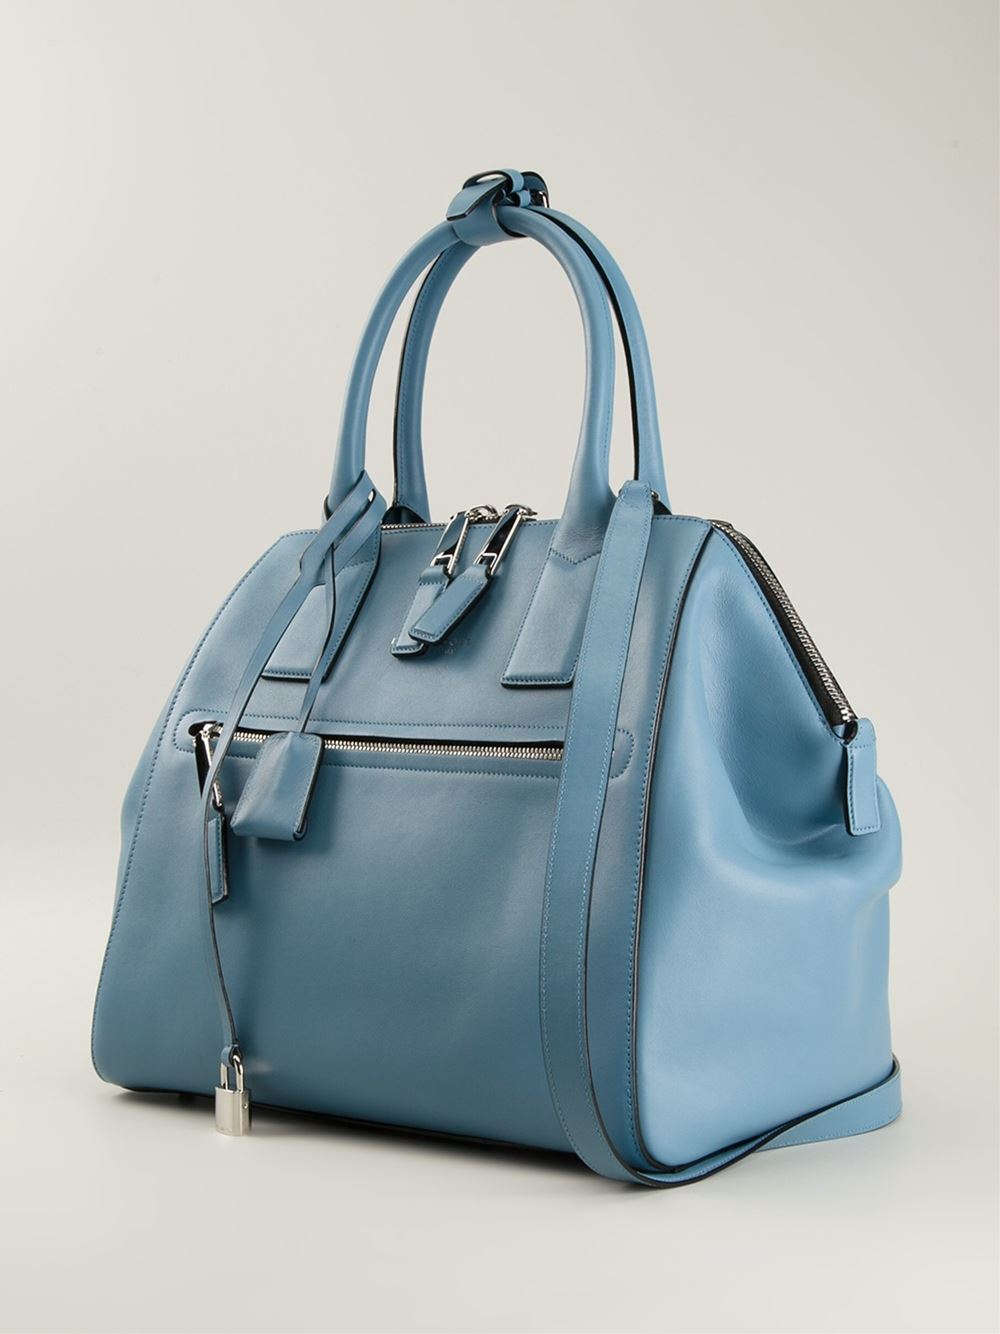 Marc Jacobs Large 'Incognito' Tote Bag in Blue - Lyst